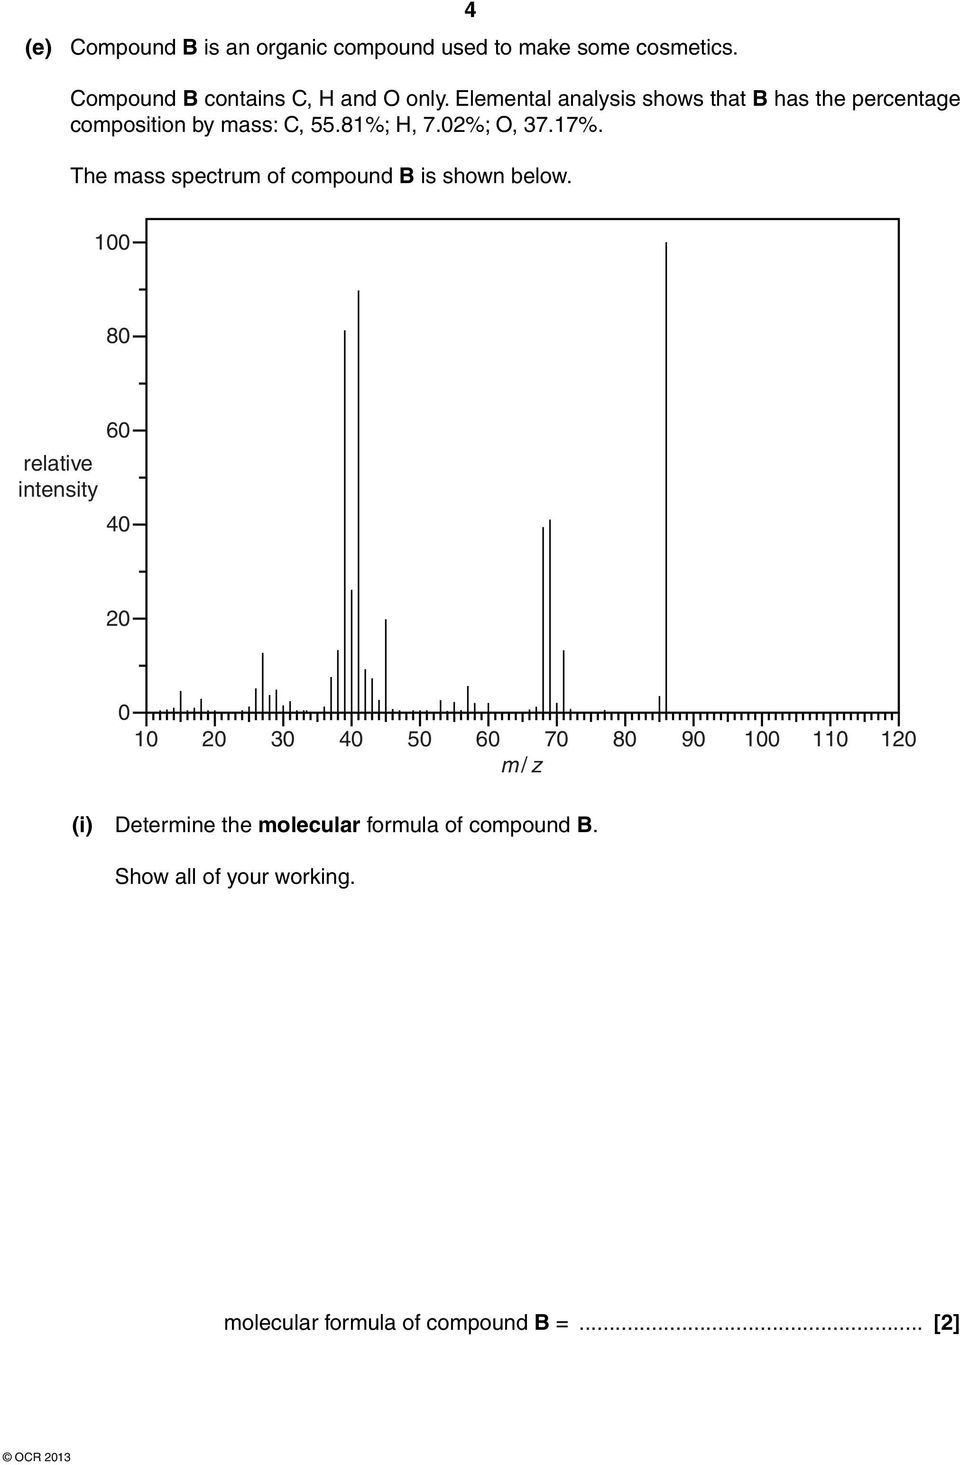 The mass spectrum of compound B is shown below.